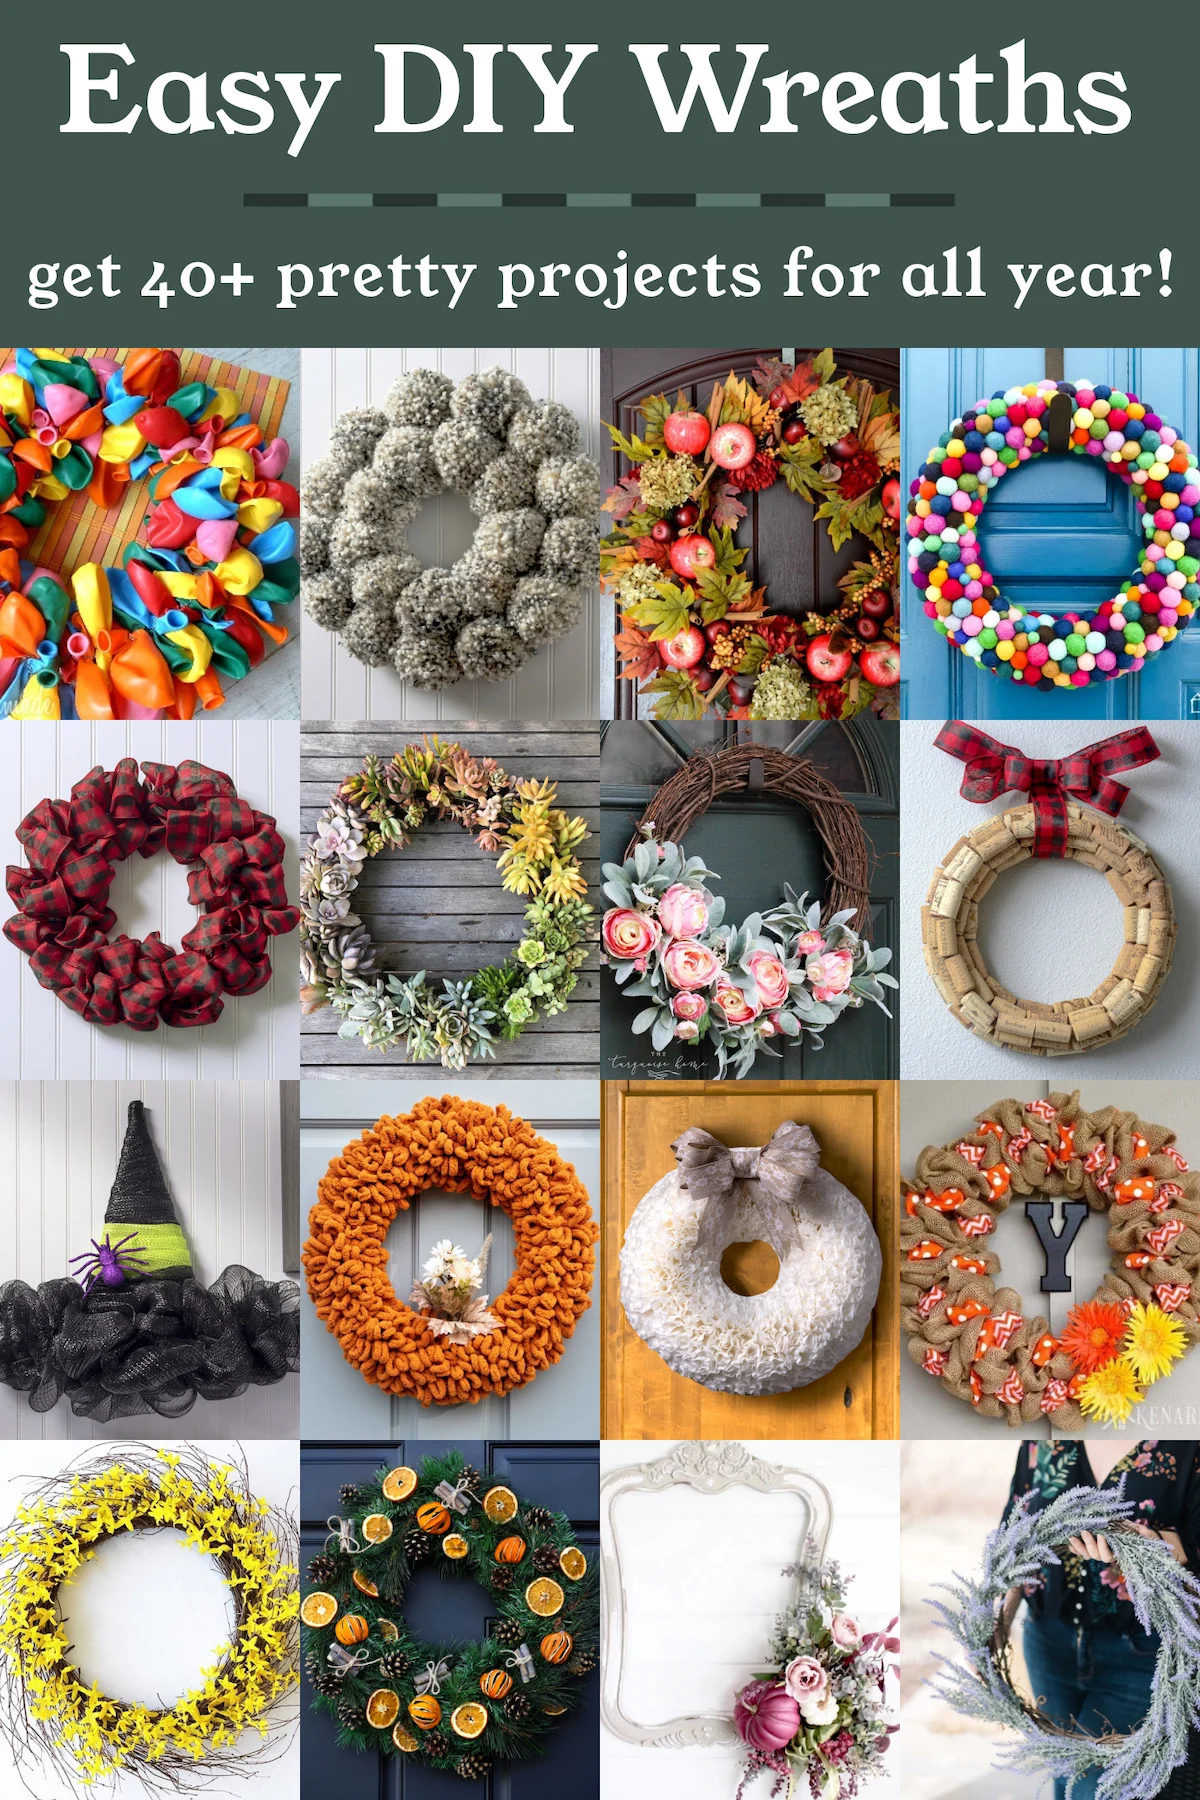 How to Make a Felt Succulent Wreath - MY 100 YEAR OLD HOME